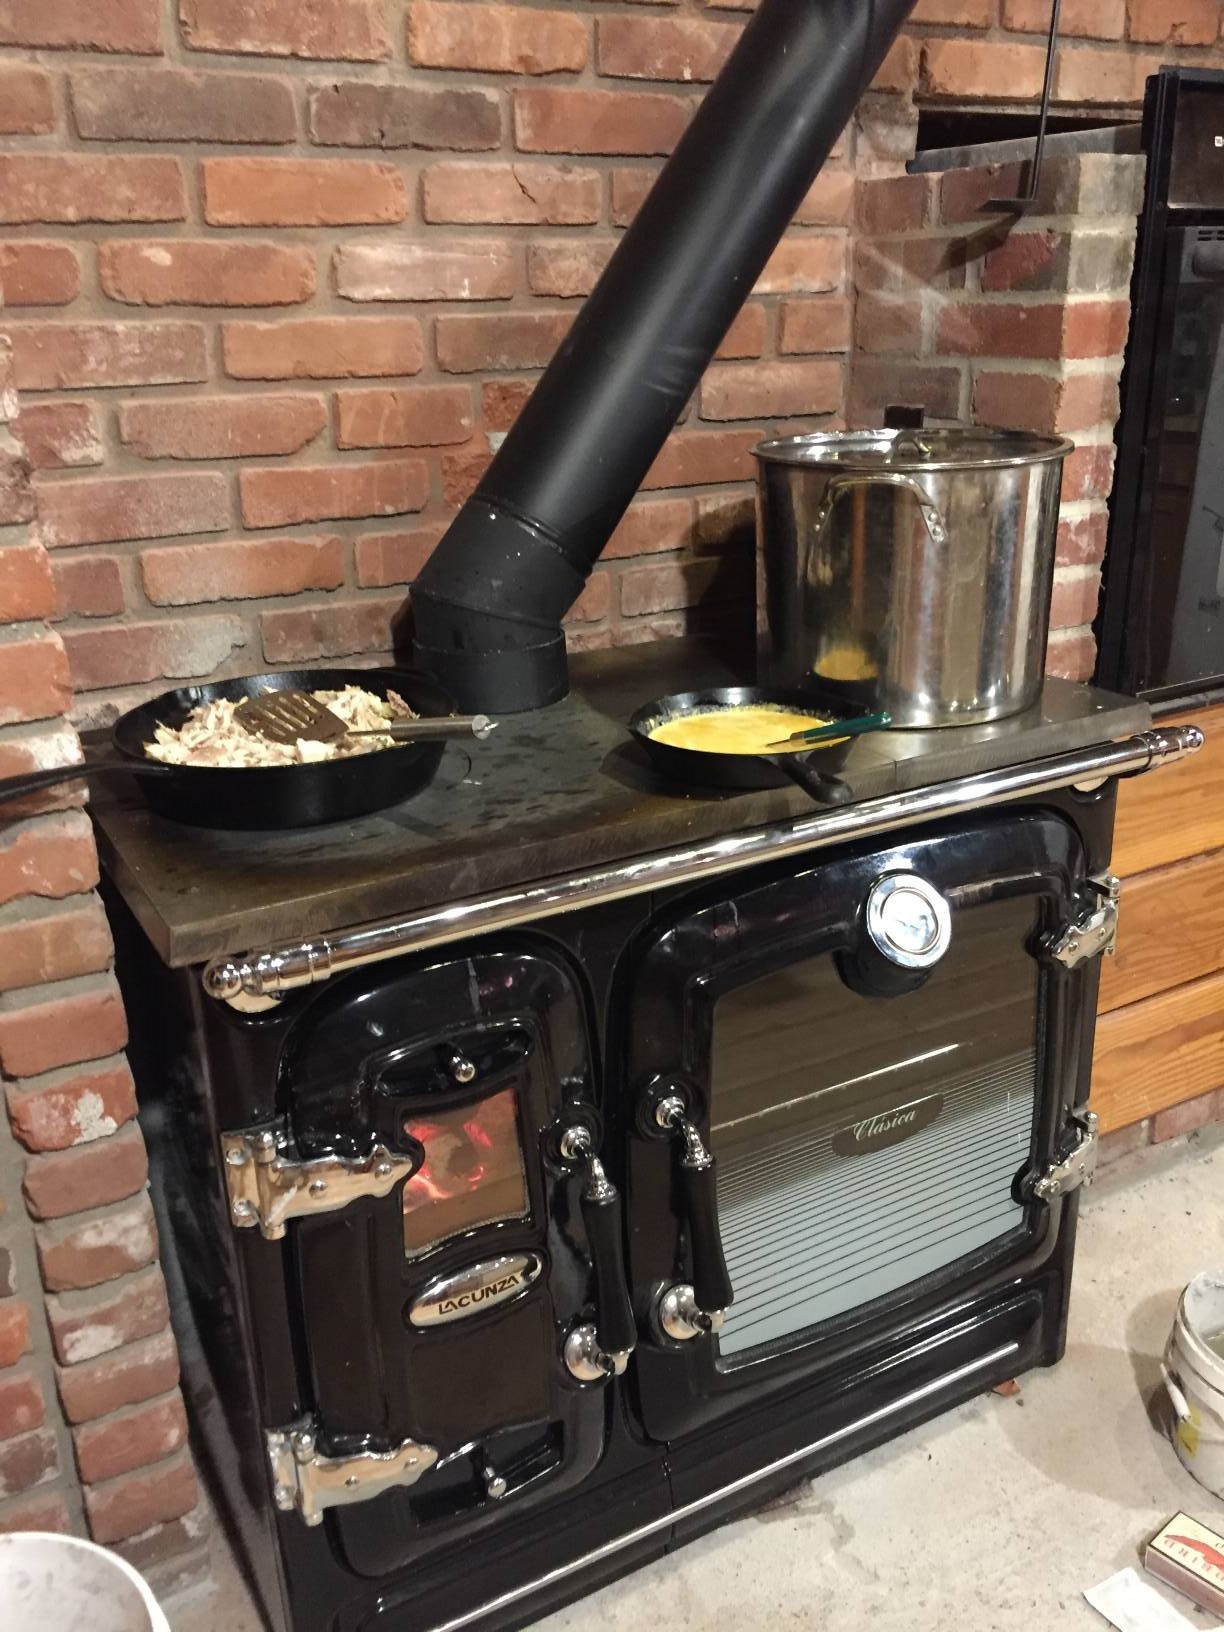  Wood Burning Cook Stove with Simple Decor